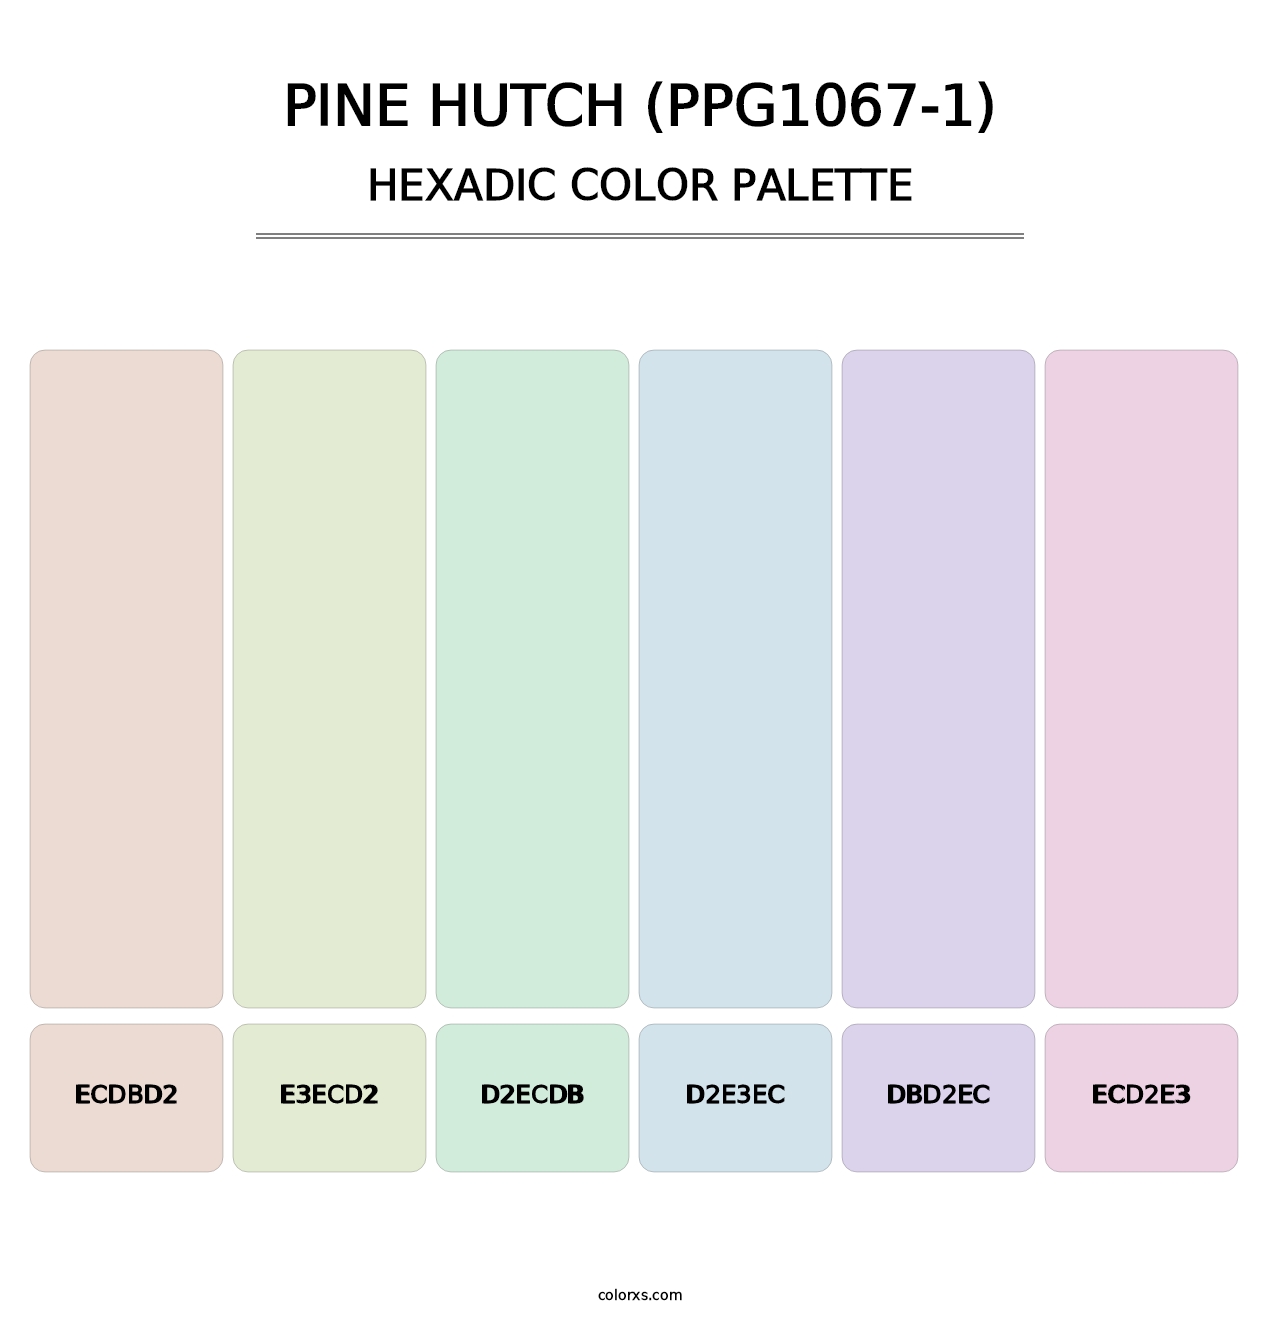 Pine Hutch (PPG1067-1) - Hexadic Color Palette